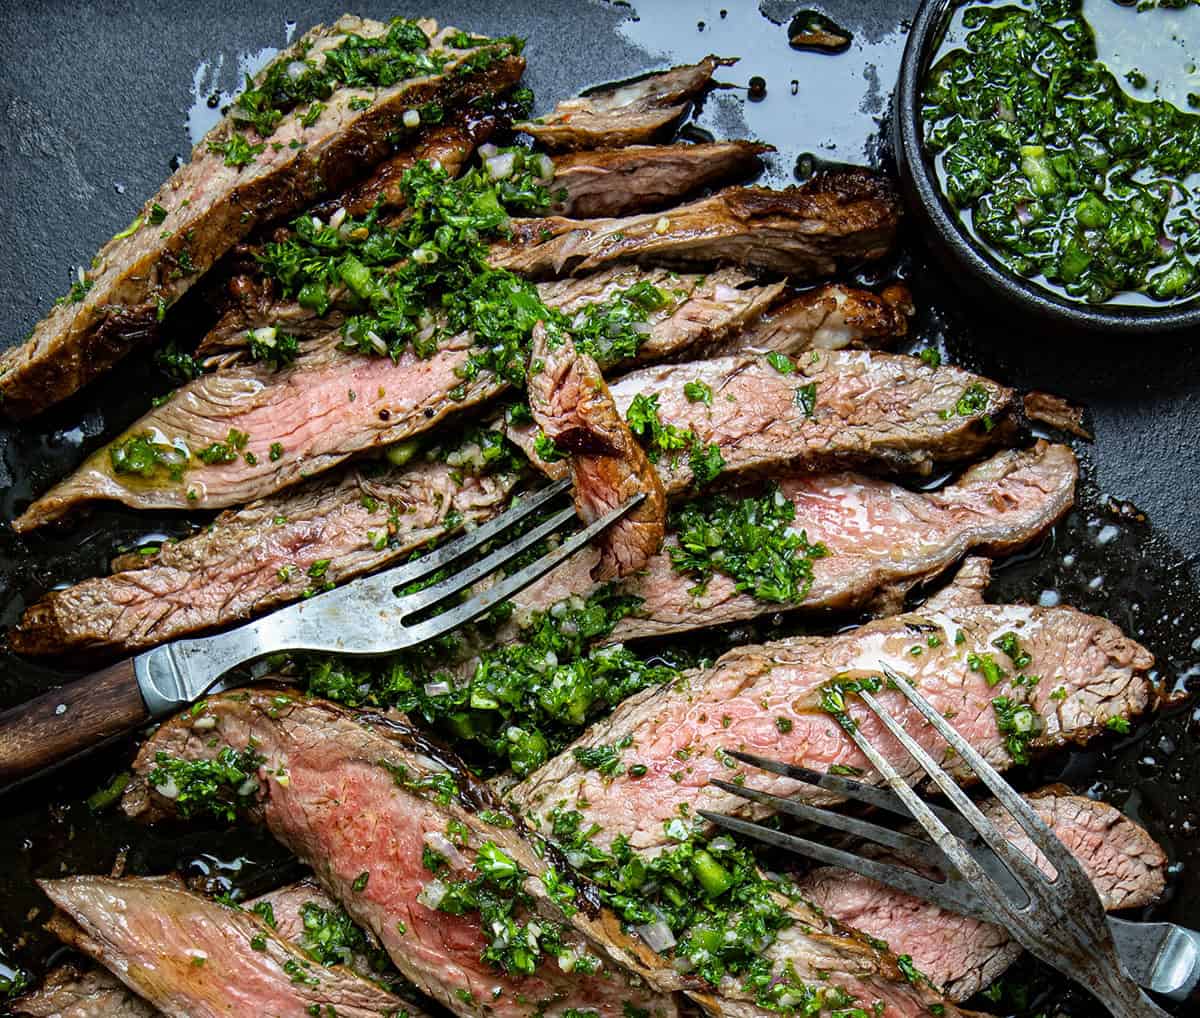 Chimichurri London Broil cut into strips showing tender medium-rare beef covered in chimichurri sauce.